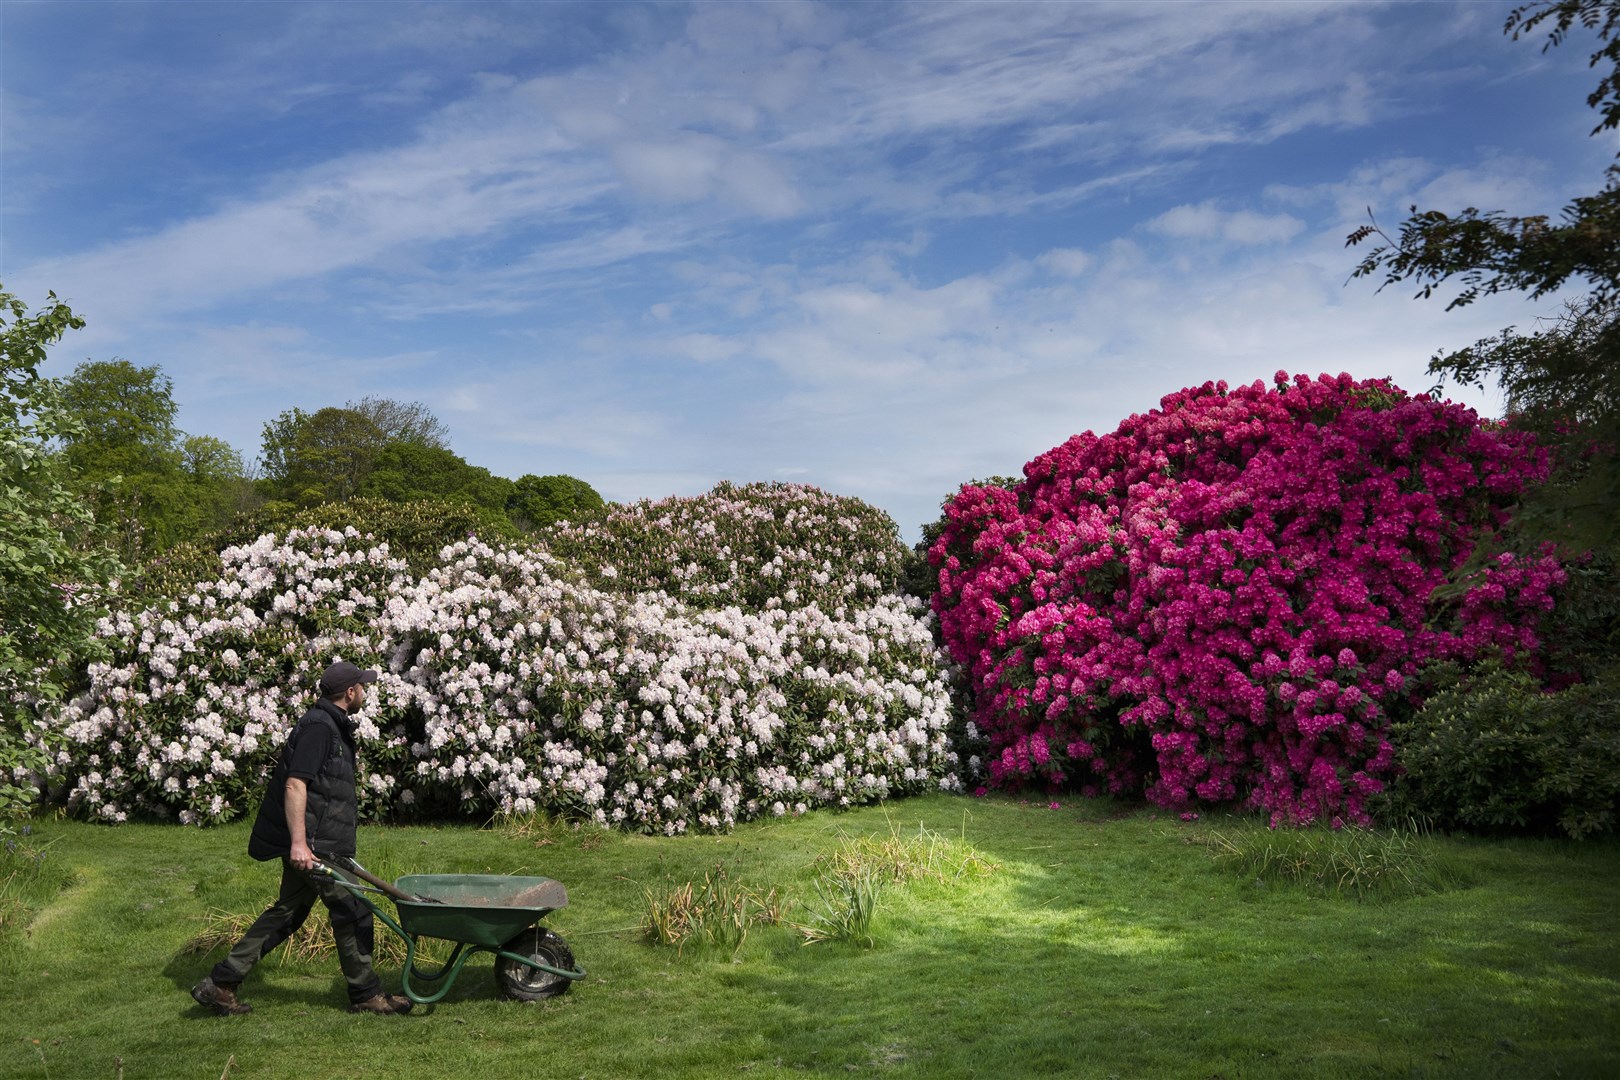 Although loved by gardeners, rhododendron is another invasive alien species in the UK (PA)